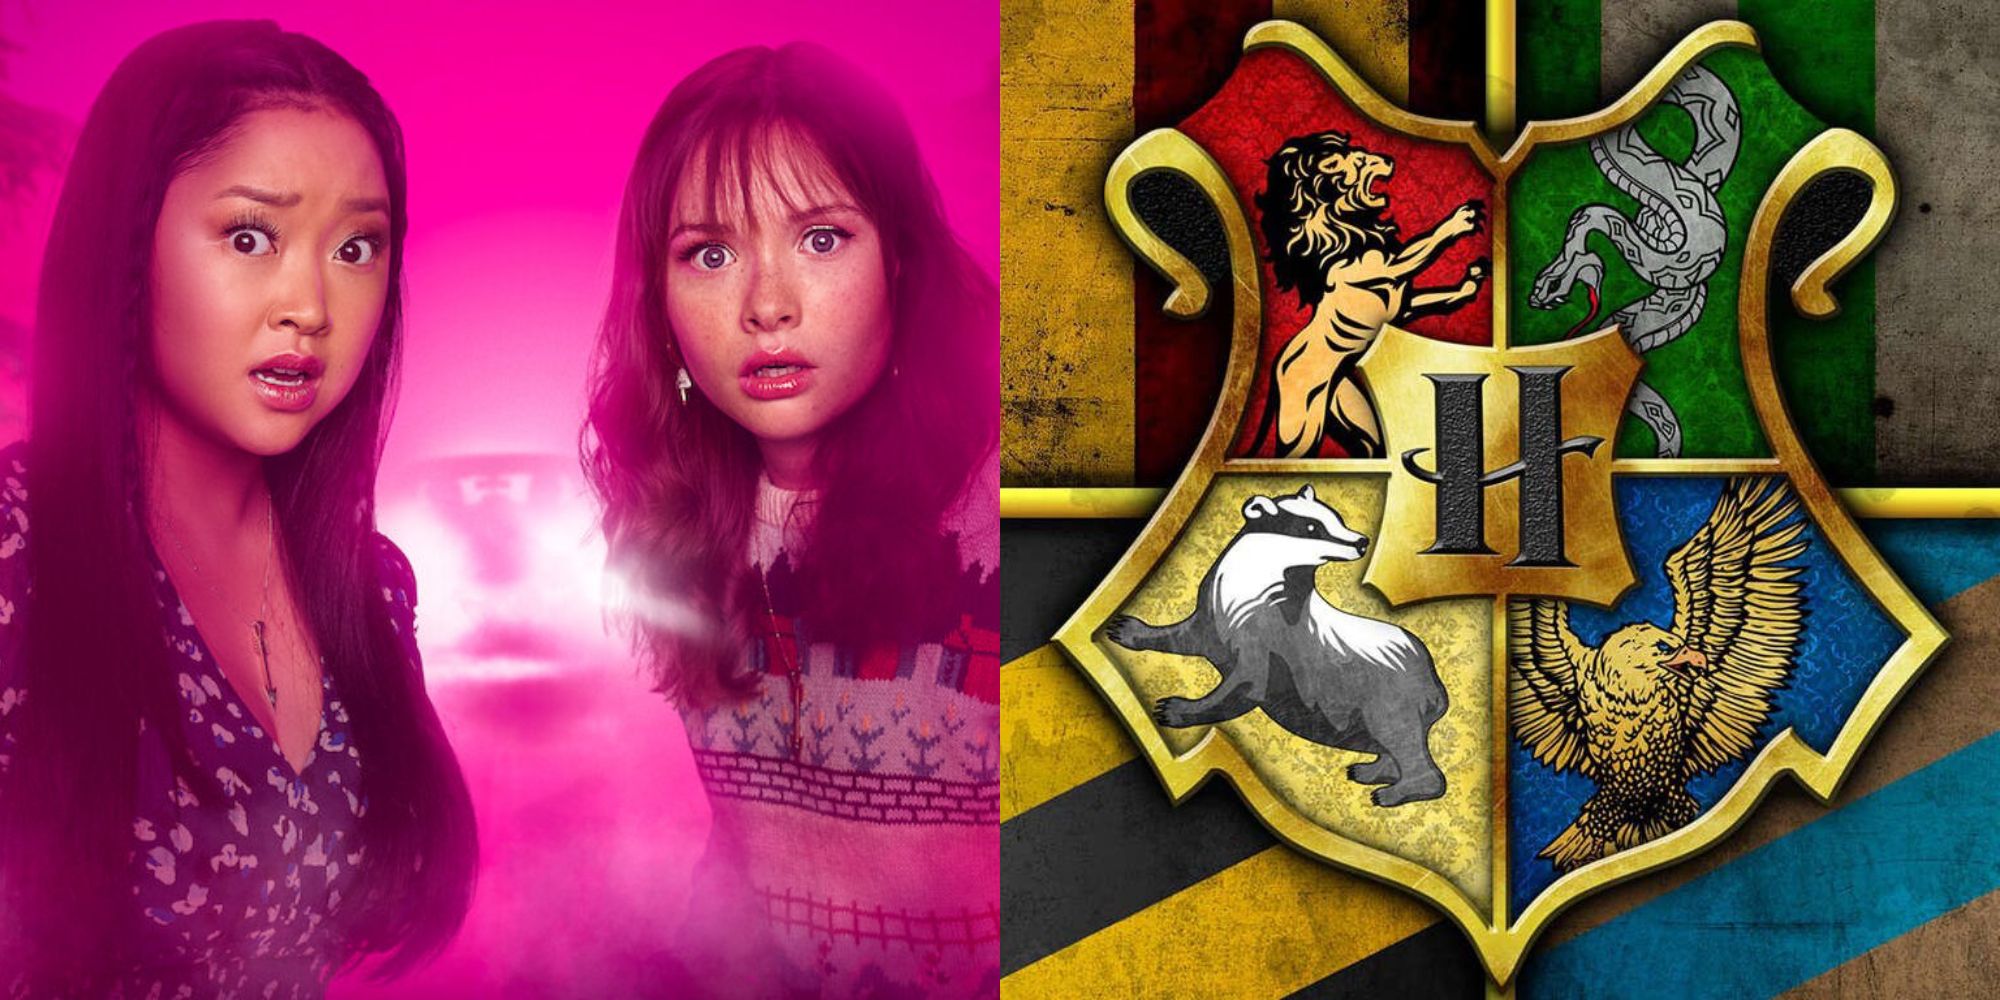 Split image showing the main characters from Boo, Bitch and the Hogwarts crest.